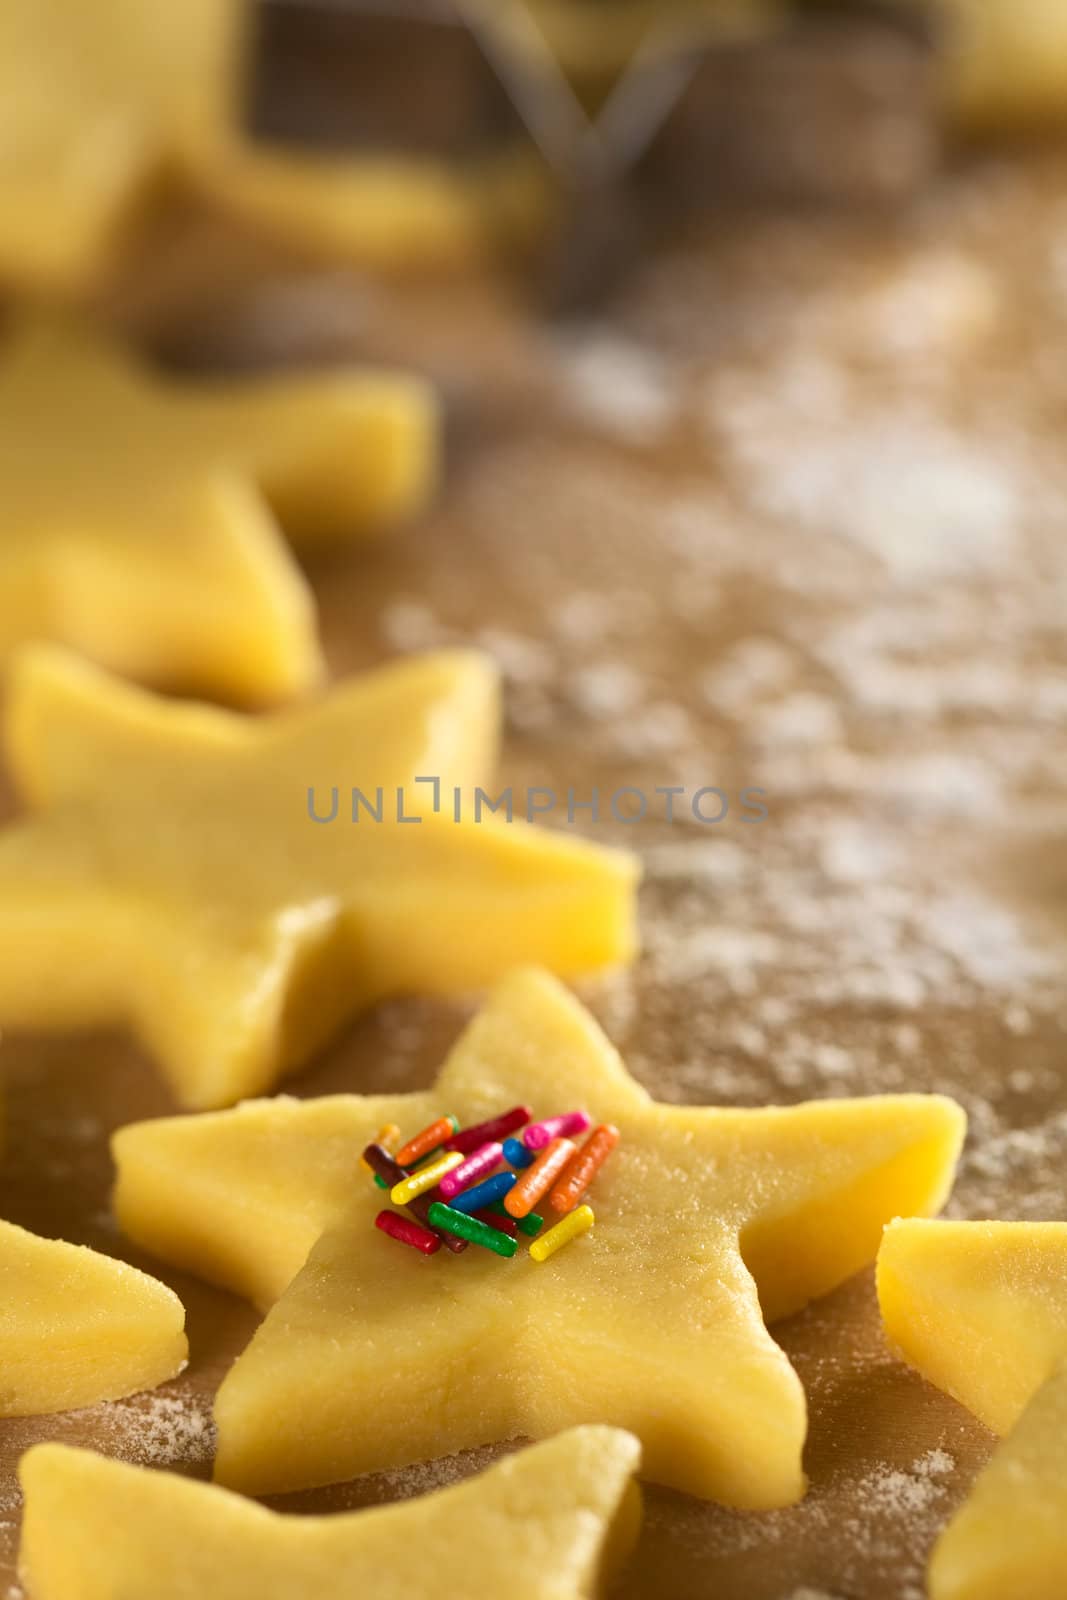 Unbaked star-shaped cookies with colorful sugar sprinkles on floured wooden surface (Selective Focus, Focus on the front of the colorful sprinkles)